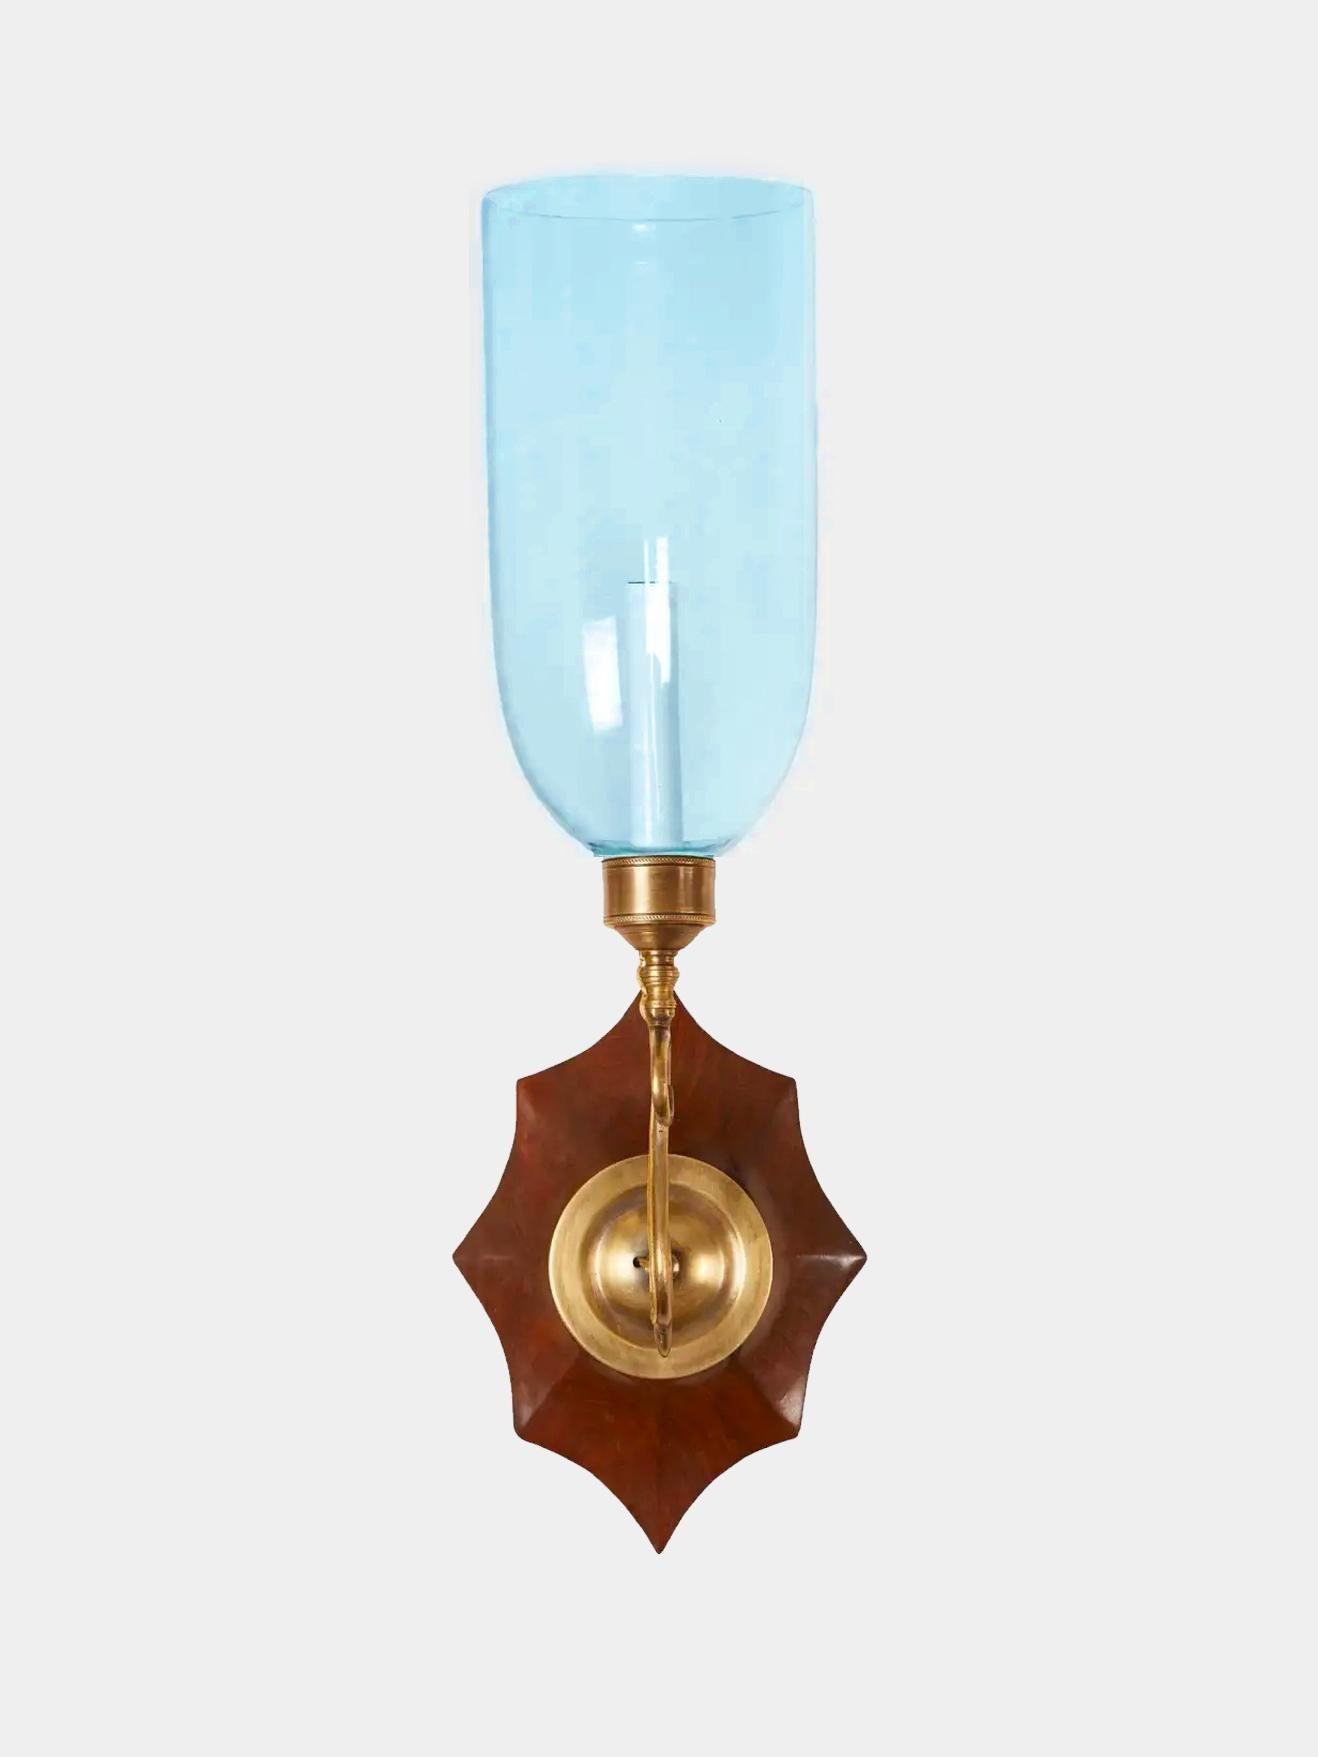 Hand-Carved Pair of David Duncan Studio Boissy Sconces with Blue Hurricane Shades For Sale